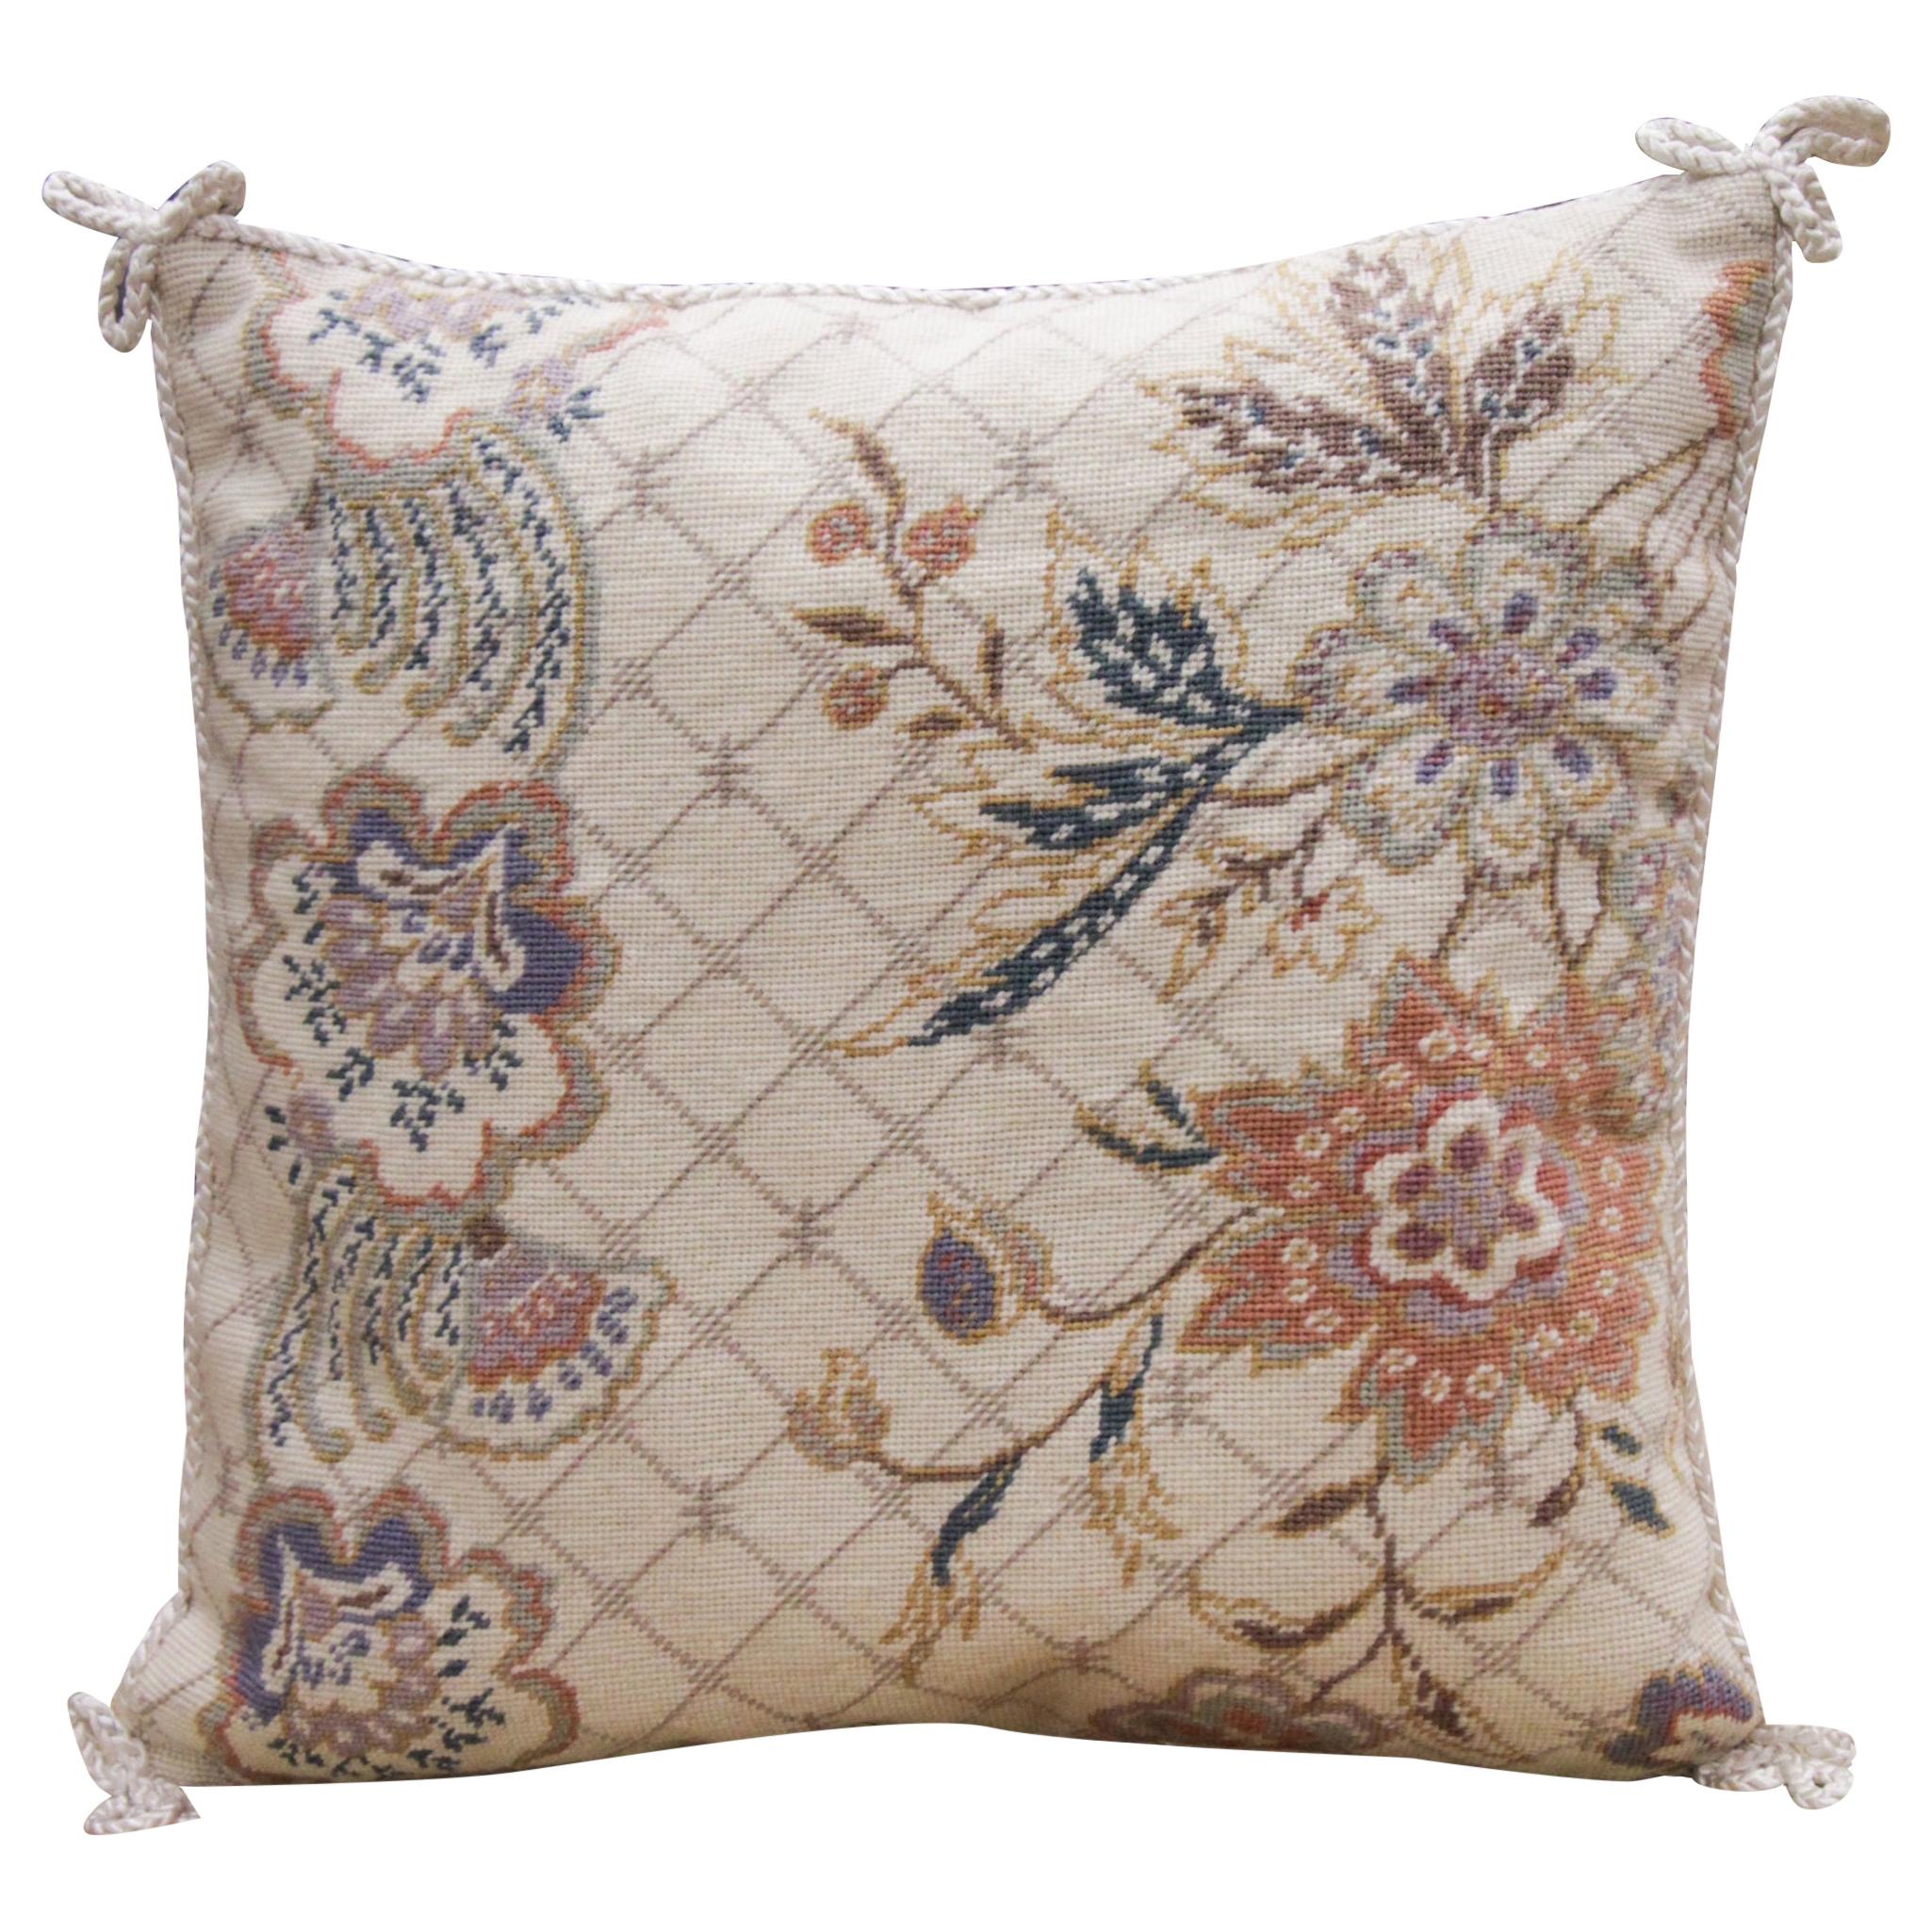 Floral Pattern Needlepoint Cushion Cover Hand knotted Pillow Case